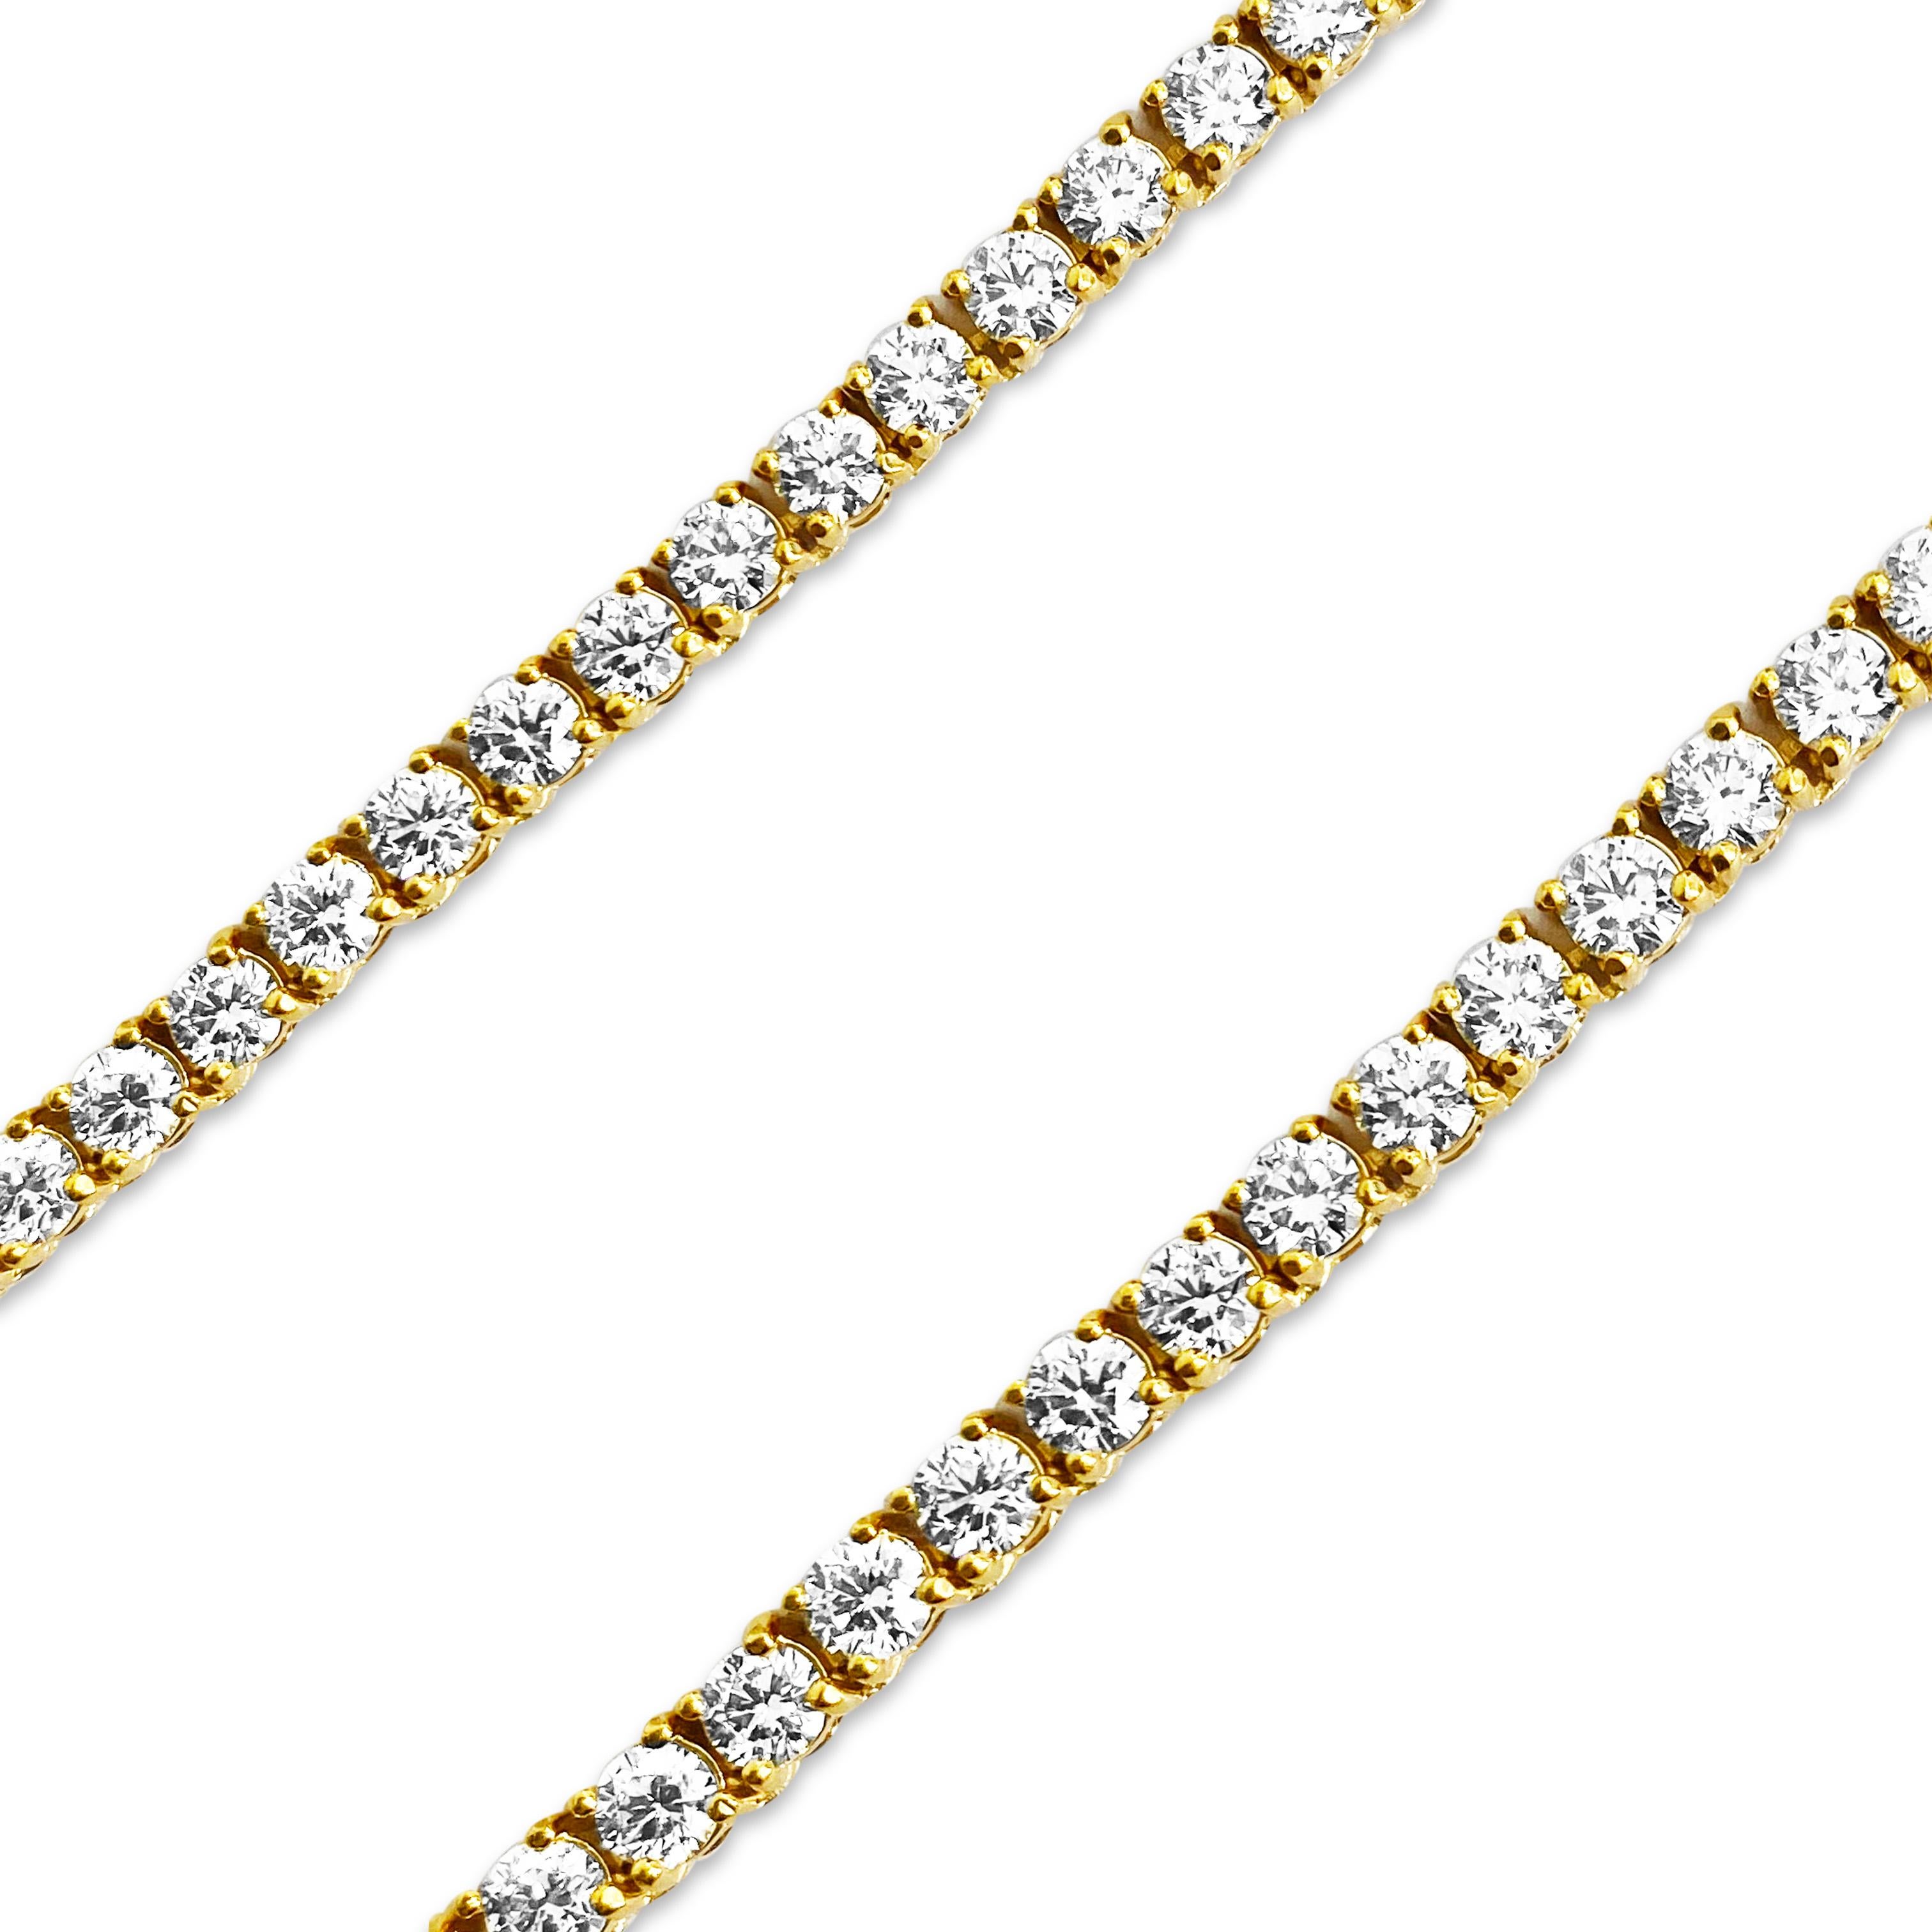 15.00 Carat VVS Diamond Tennis Necklace in 14k Gold In Excellent Condition For Sale In Miami, FL